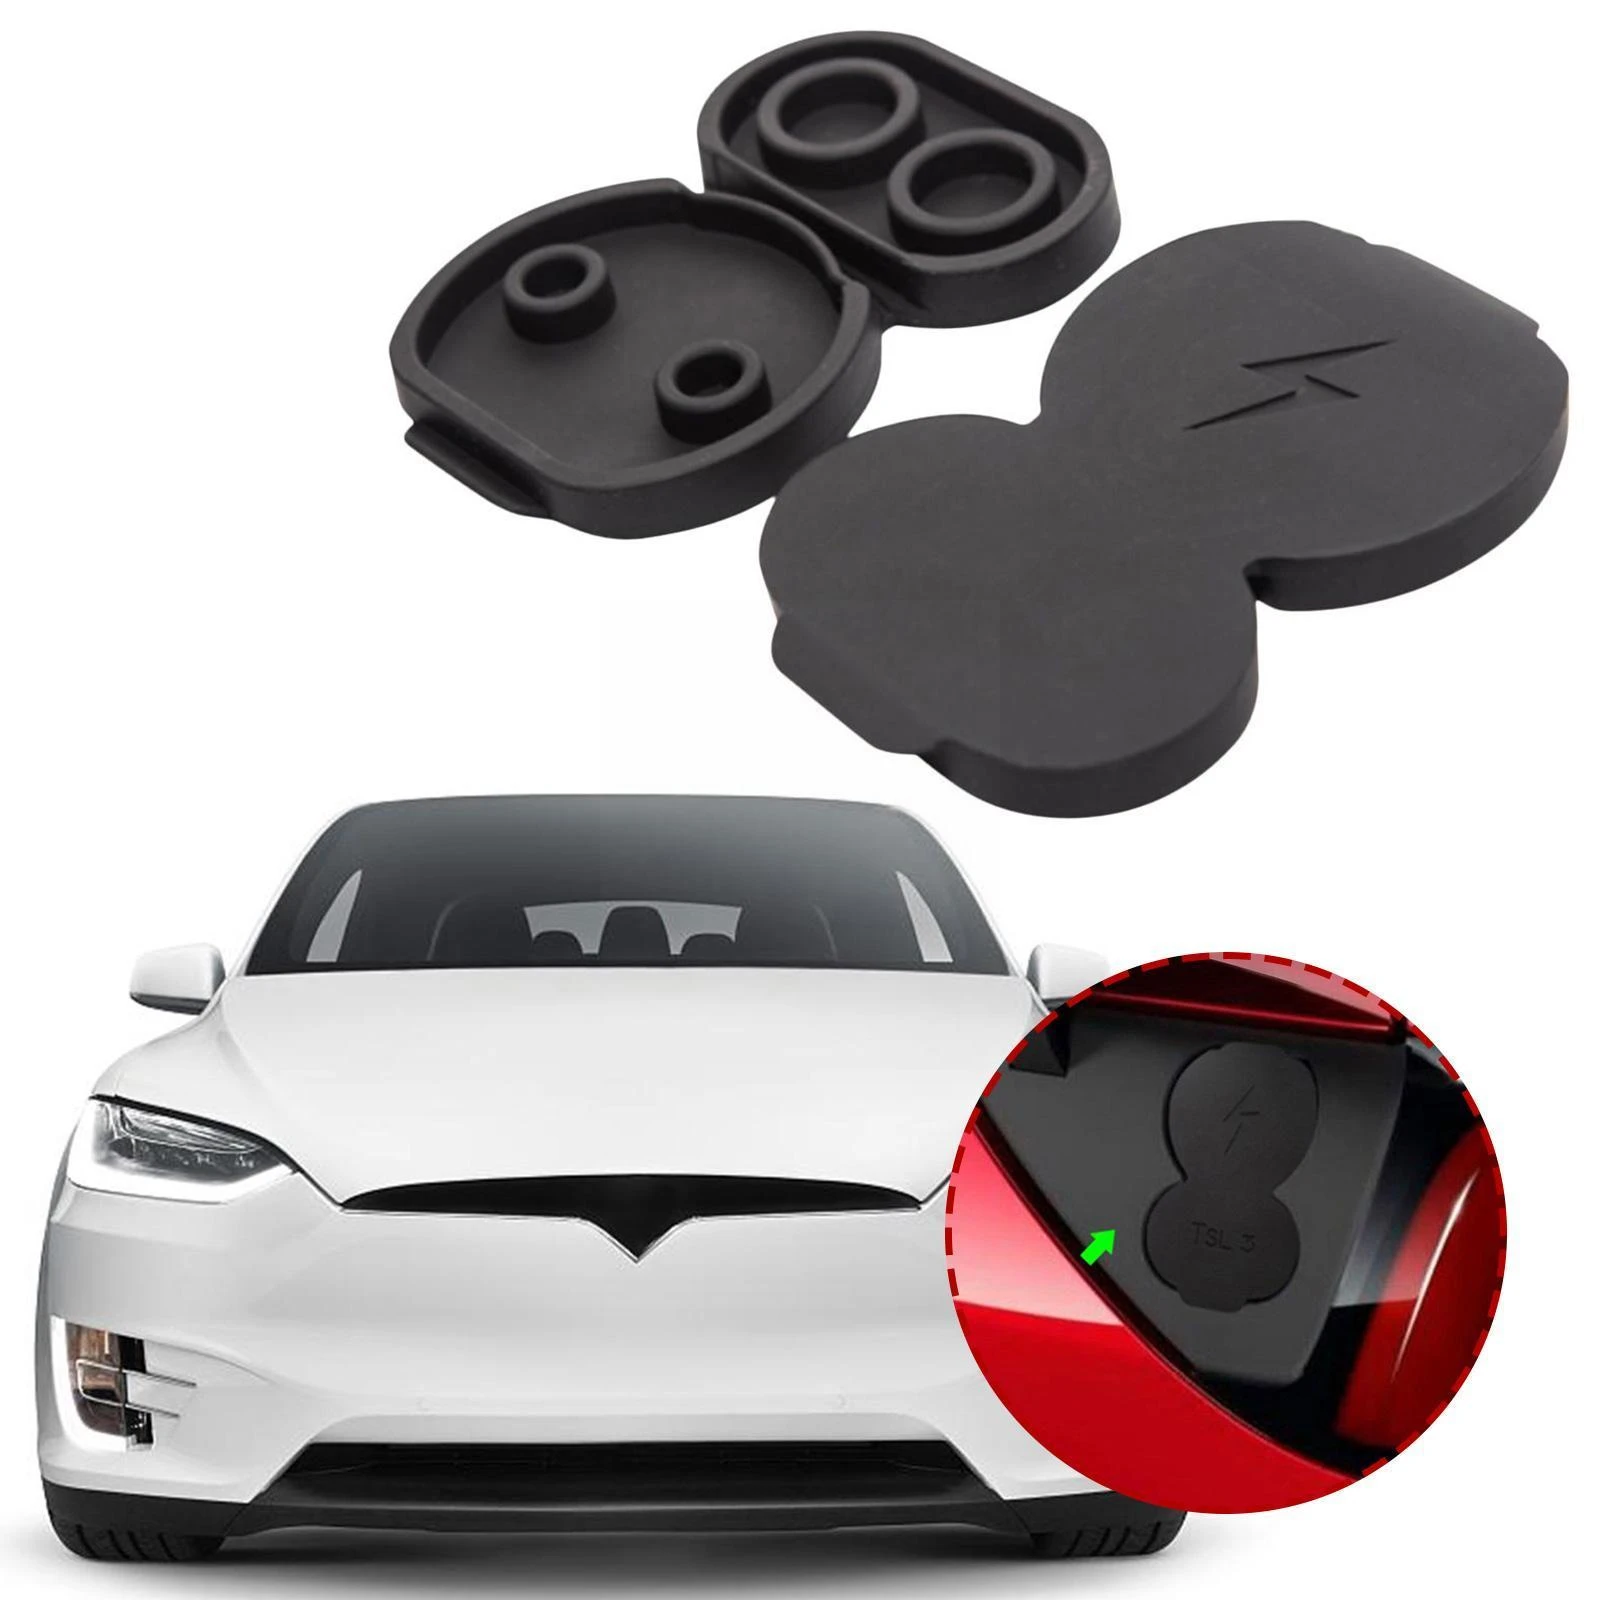 2022 New for Tesla Model 3 Accessories Plug Car Charging Port Dust Protective Cover Car Model Y Model 3 Accessories U1N9| | - AliExpress